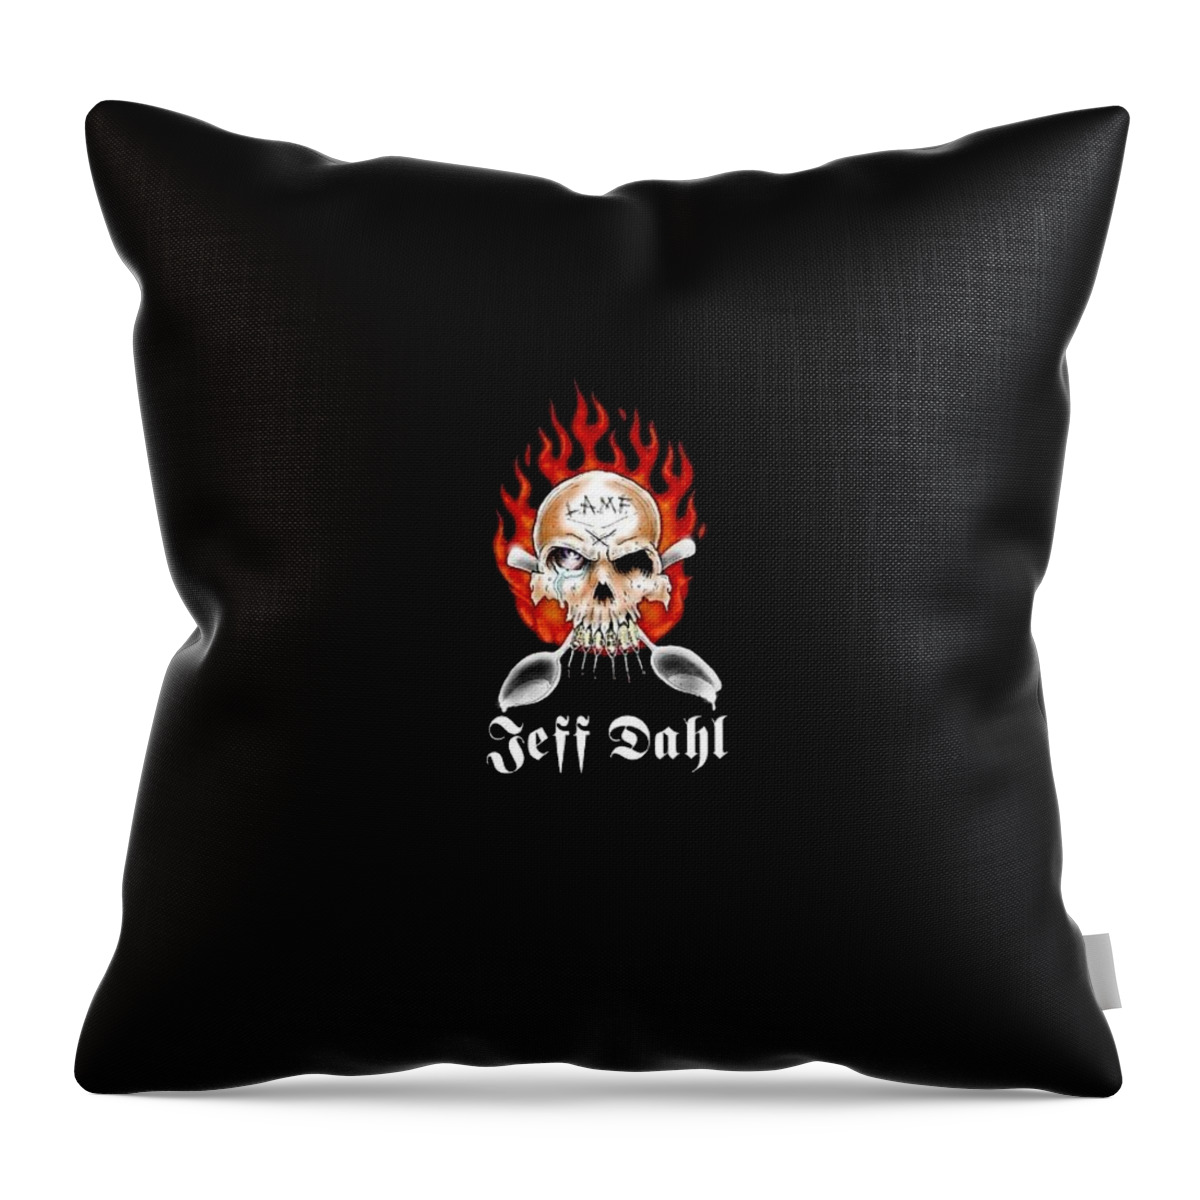 Jeff Dahl Throw Pillow featuring the painting Jeff Dahl - Lamf by Ryan Almighty